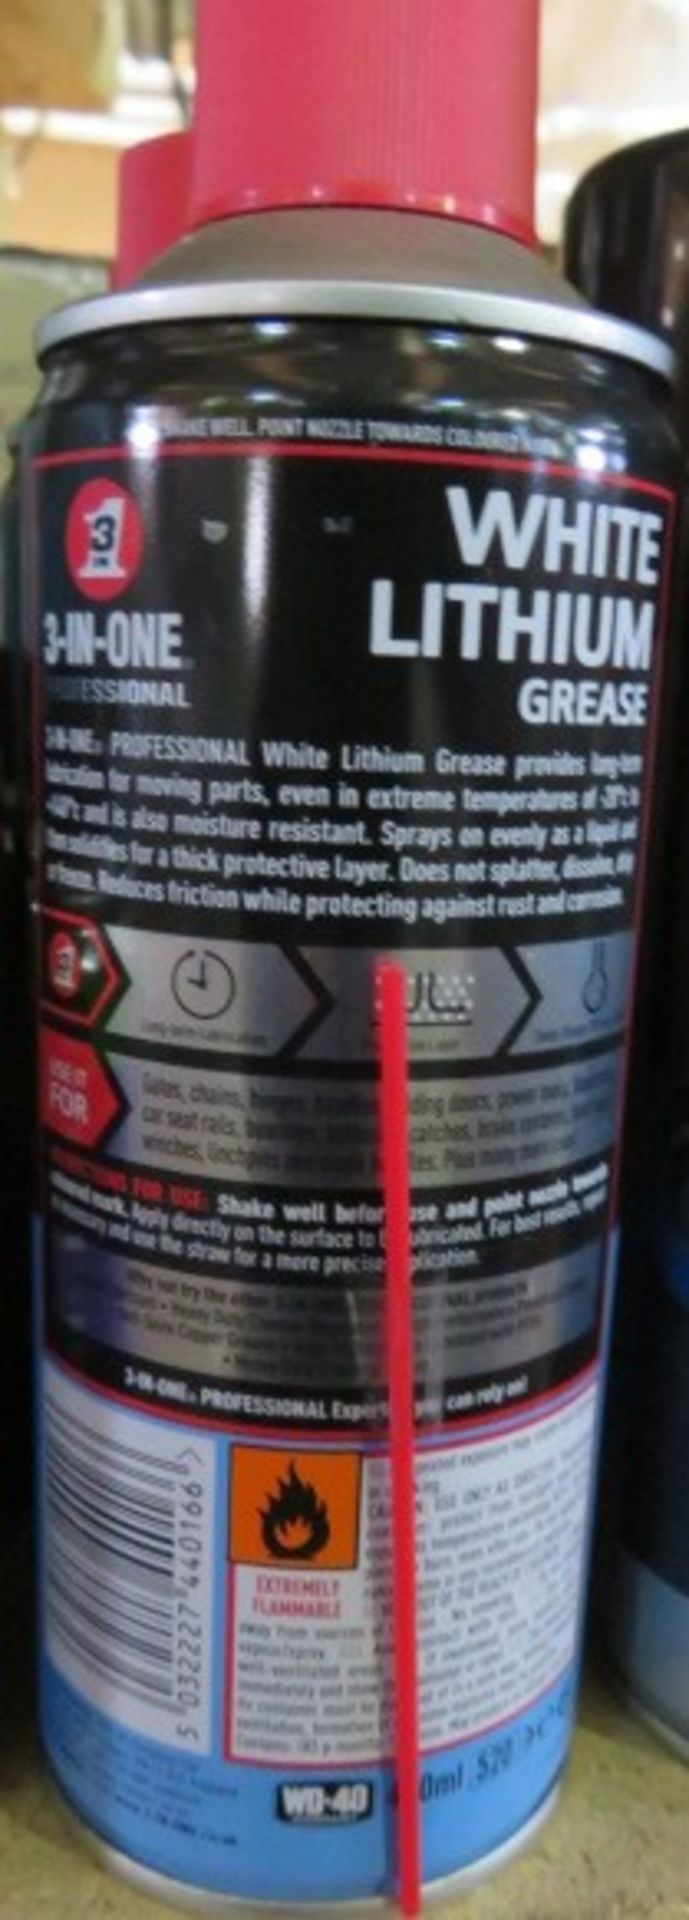 4x 3in1 Professional White Lithium Grease. 400ml. UK DELIVERY AVAILABLE FROM £14 PLUS VAT - HU... - Image 2 of 2